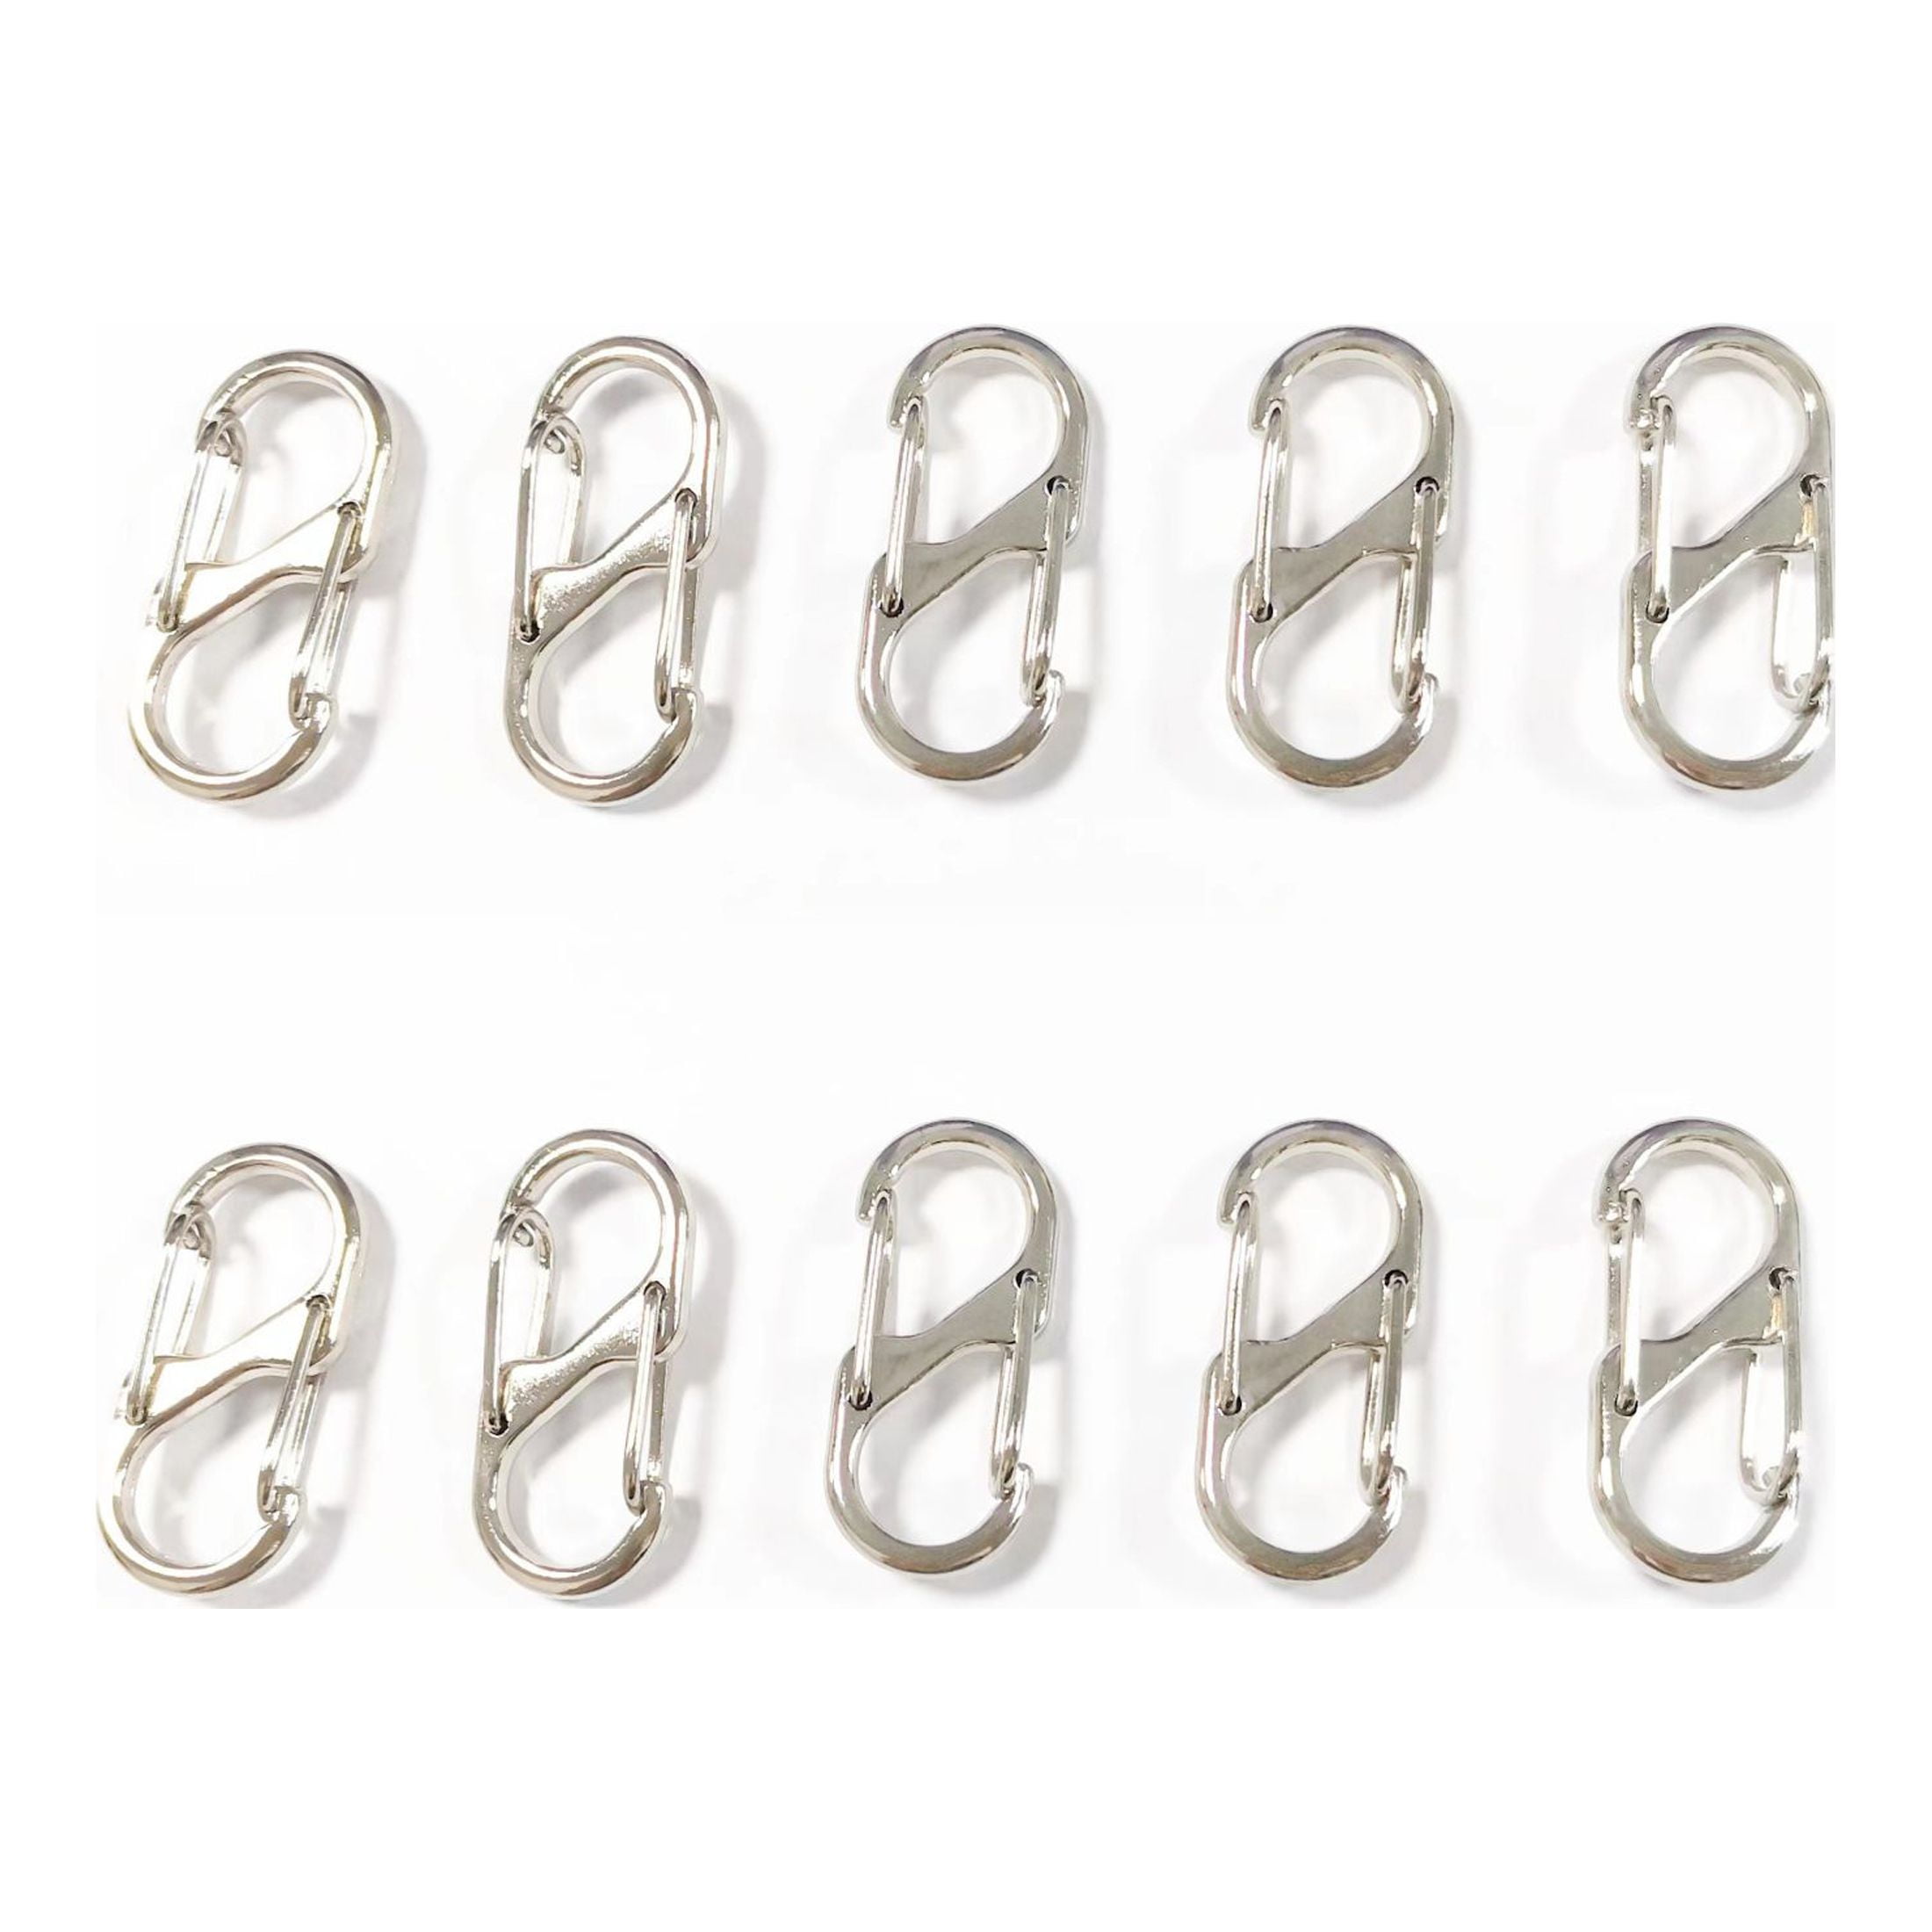 20 Pcs Dual Spring S Carabiner Zipper-Zipper Clips Anti Theft-Zipper Pull  Locks for Backpacks-Clip Theft Deterrent for Luggage Suitcase Camping-10PCS  40MM Black and 10PCS 31MM Silver 